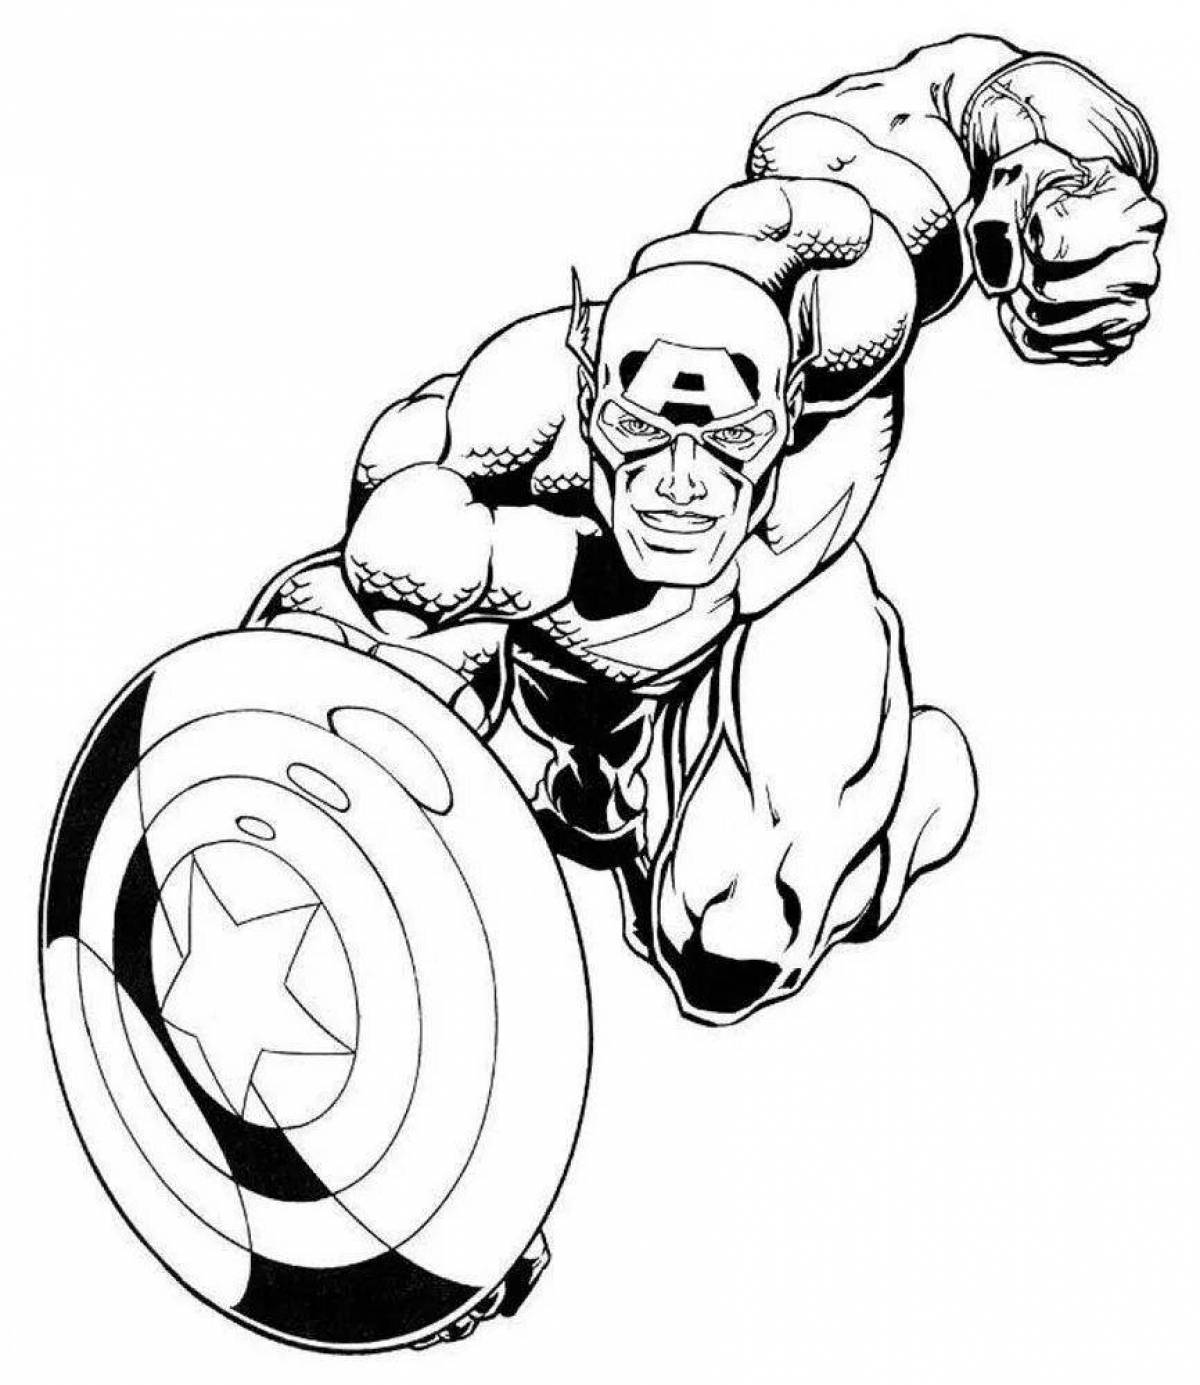 Brave captain america coloring pages for kids